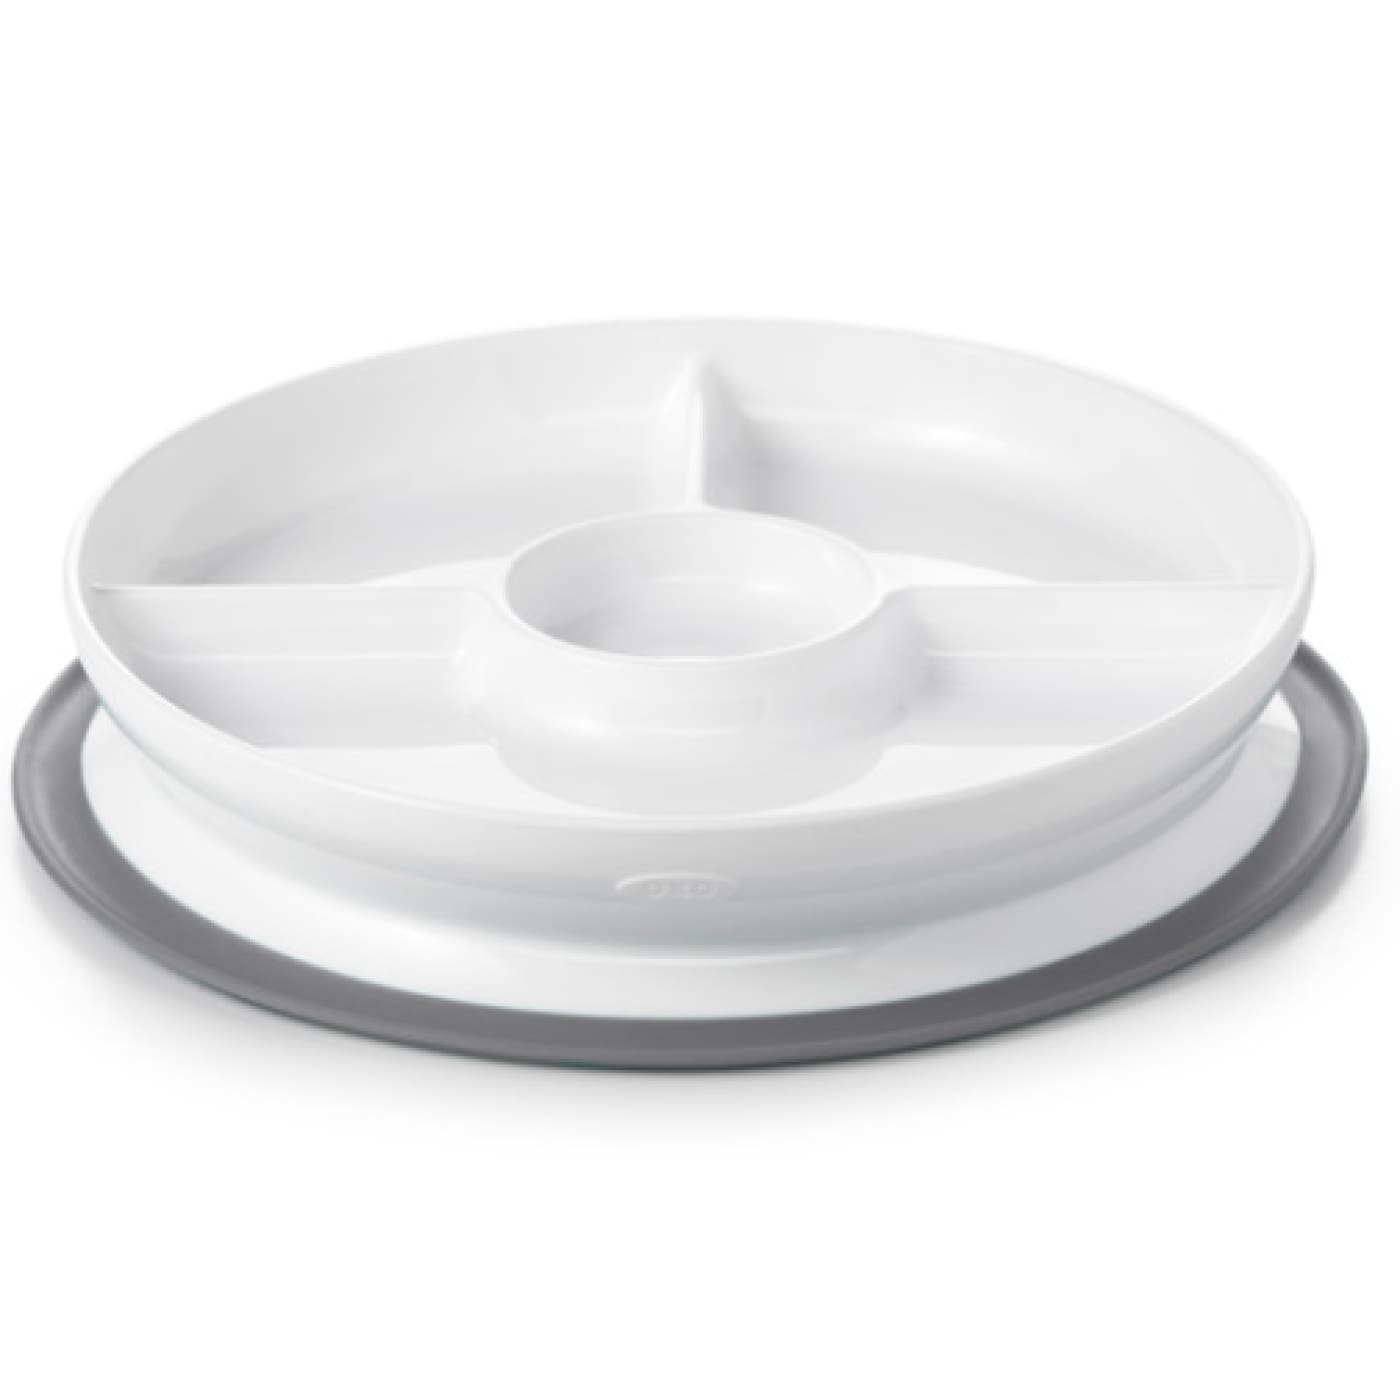 https://cdn.shopify.com/s/files/1/0070/3535/5193/products/oxo-tot-stick-stay-suction-divided-plate-grey-feeding-meal-portions-nursing-toddler-cutleryplatesbowlstoys-bubmania-tableware-porcelain-ceramic-575_1600x.jpg?v=1672795711